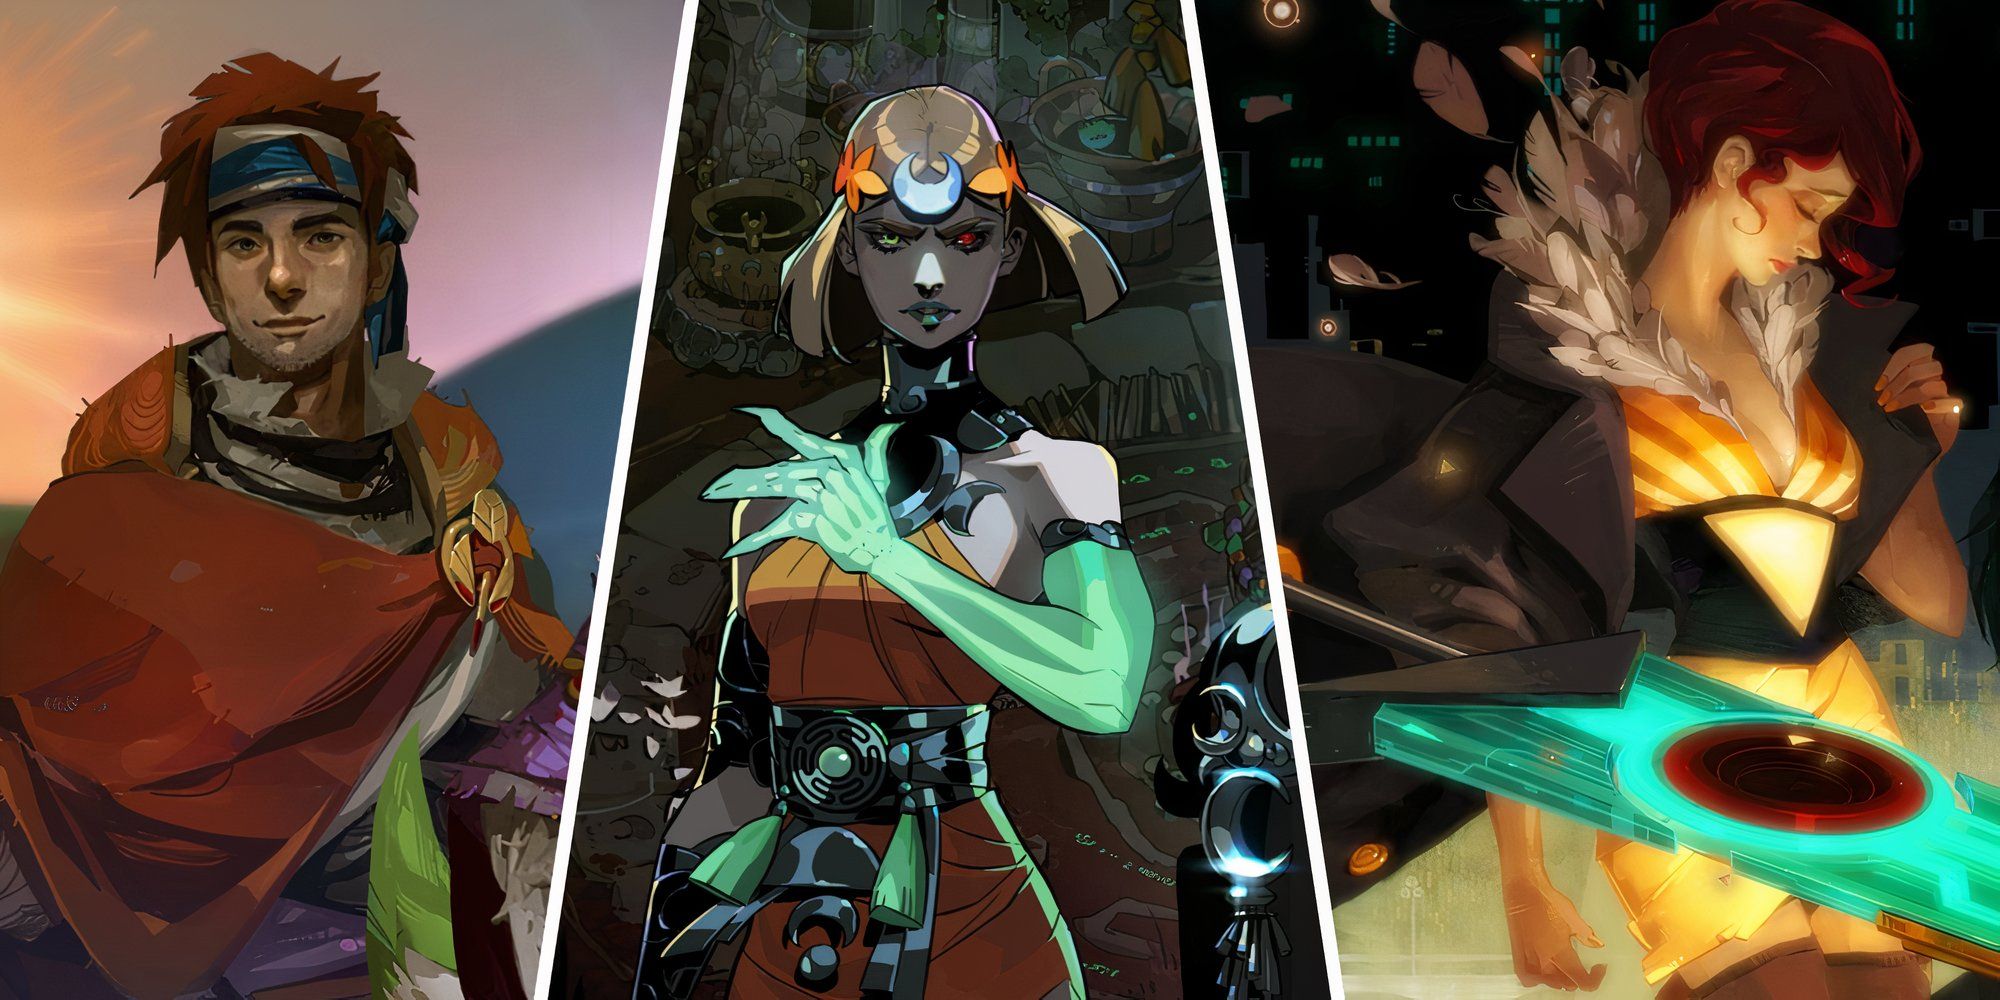 A split image showing characters from the titles of Supergiant Games